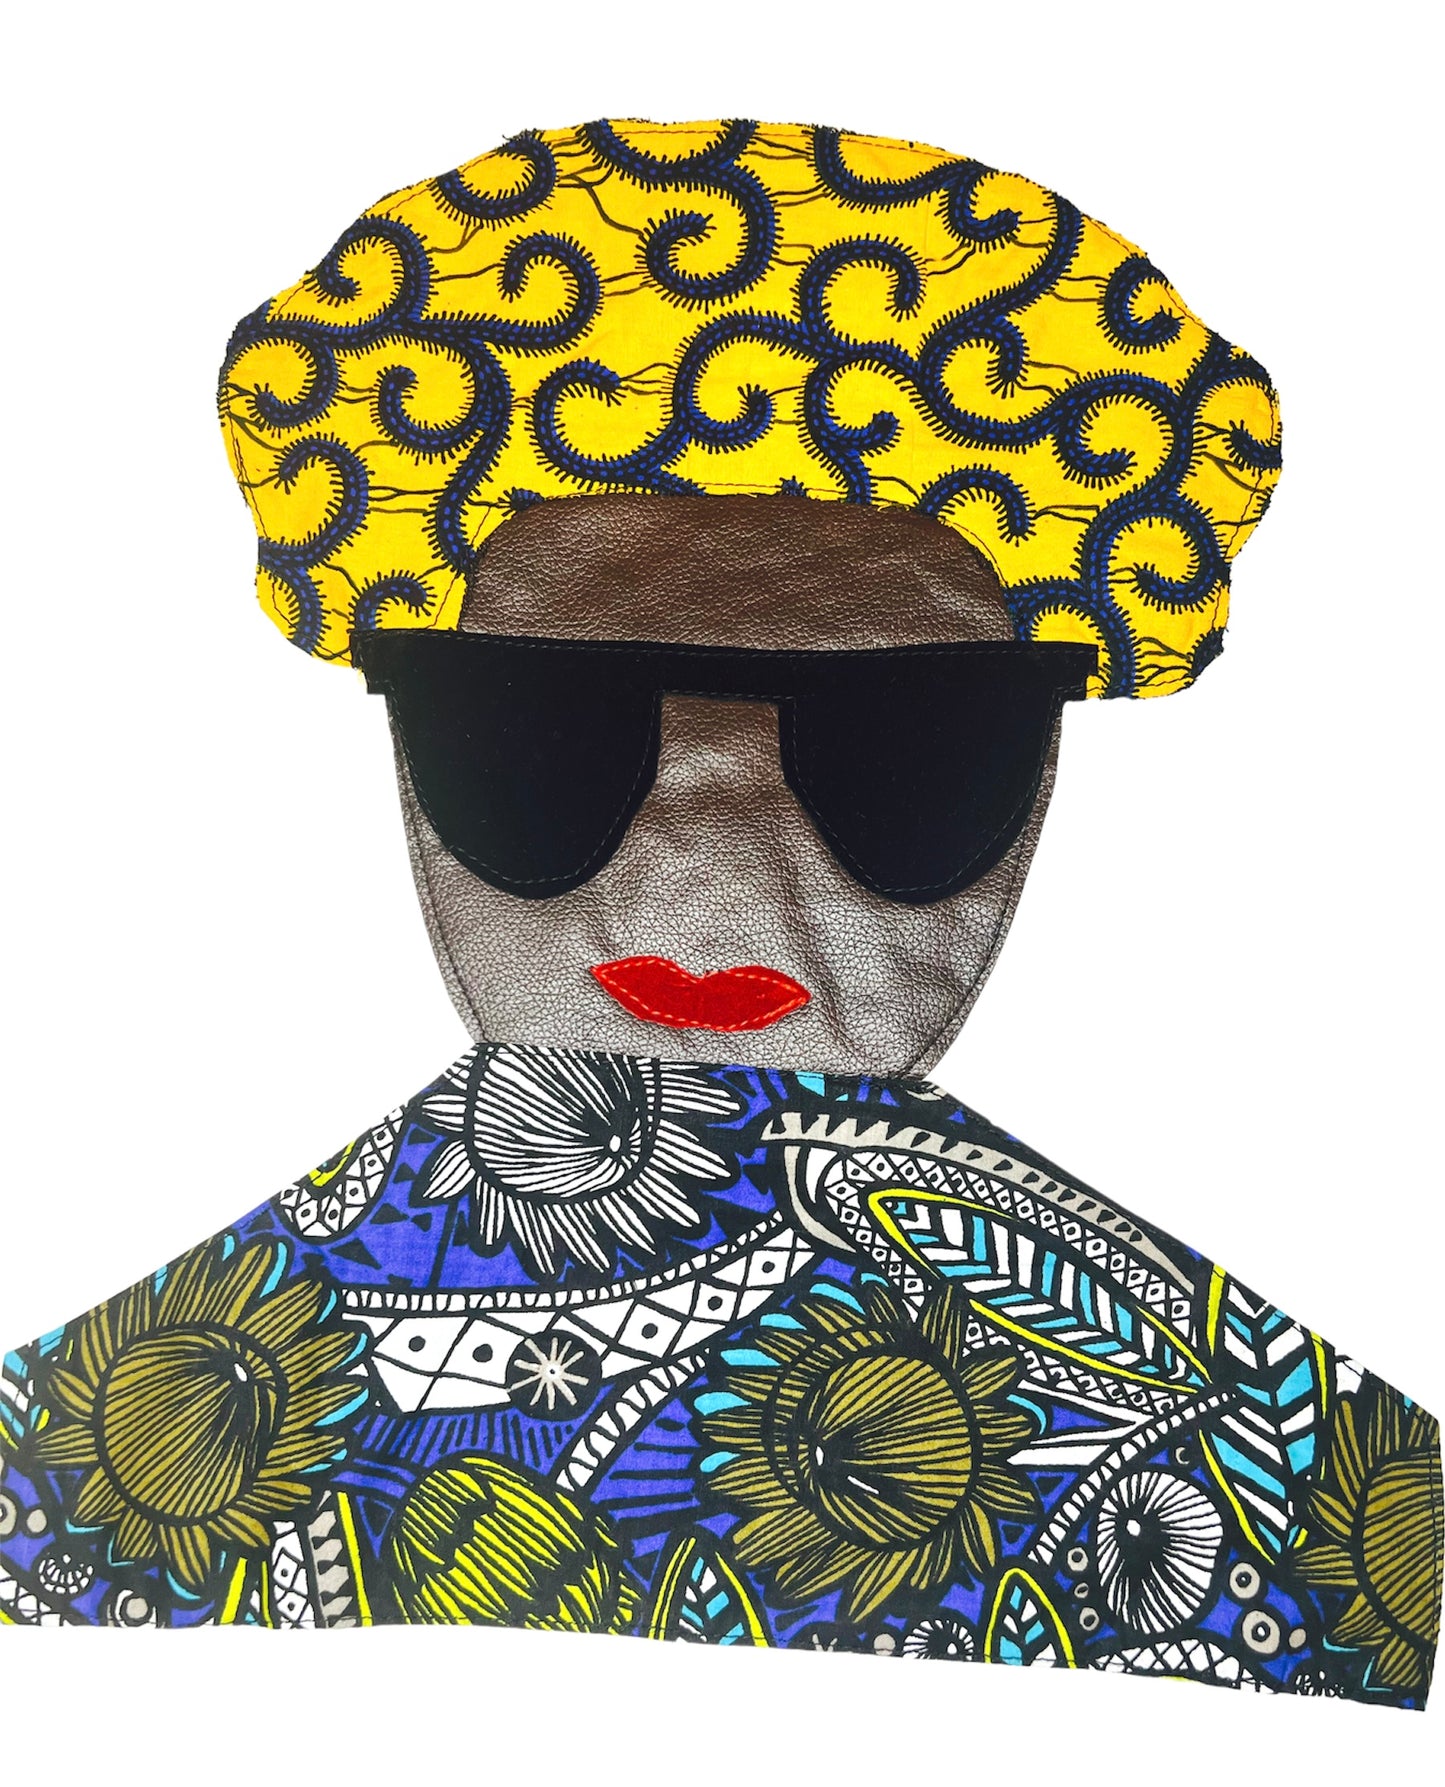 Boss Chic Tee with Ankara Bonnet and Body Wrap, Sunshades, and embossed Leather-Face.